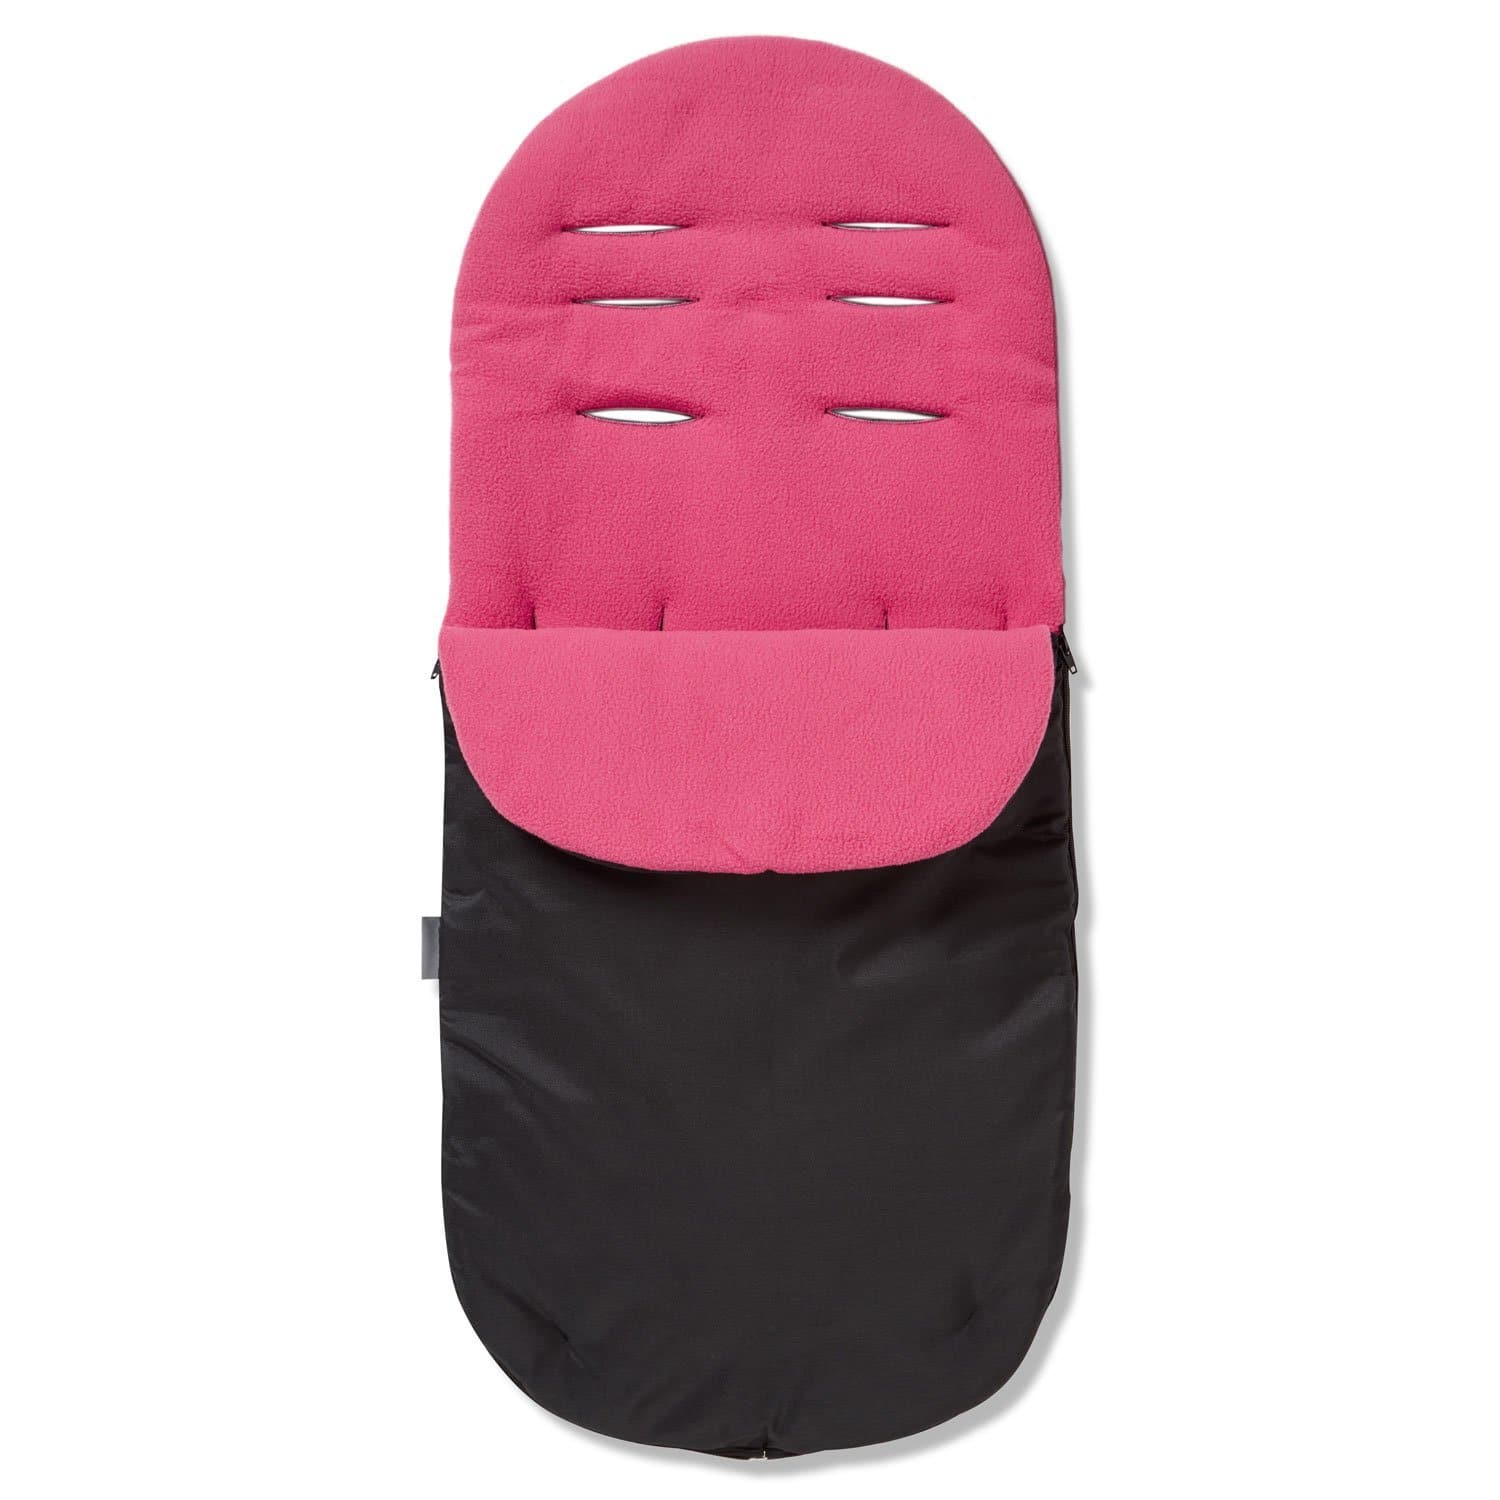 Footmuff / Cosy Toes Compatible with Bebecar Dark Pink Fits All Models 